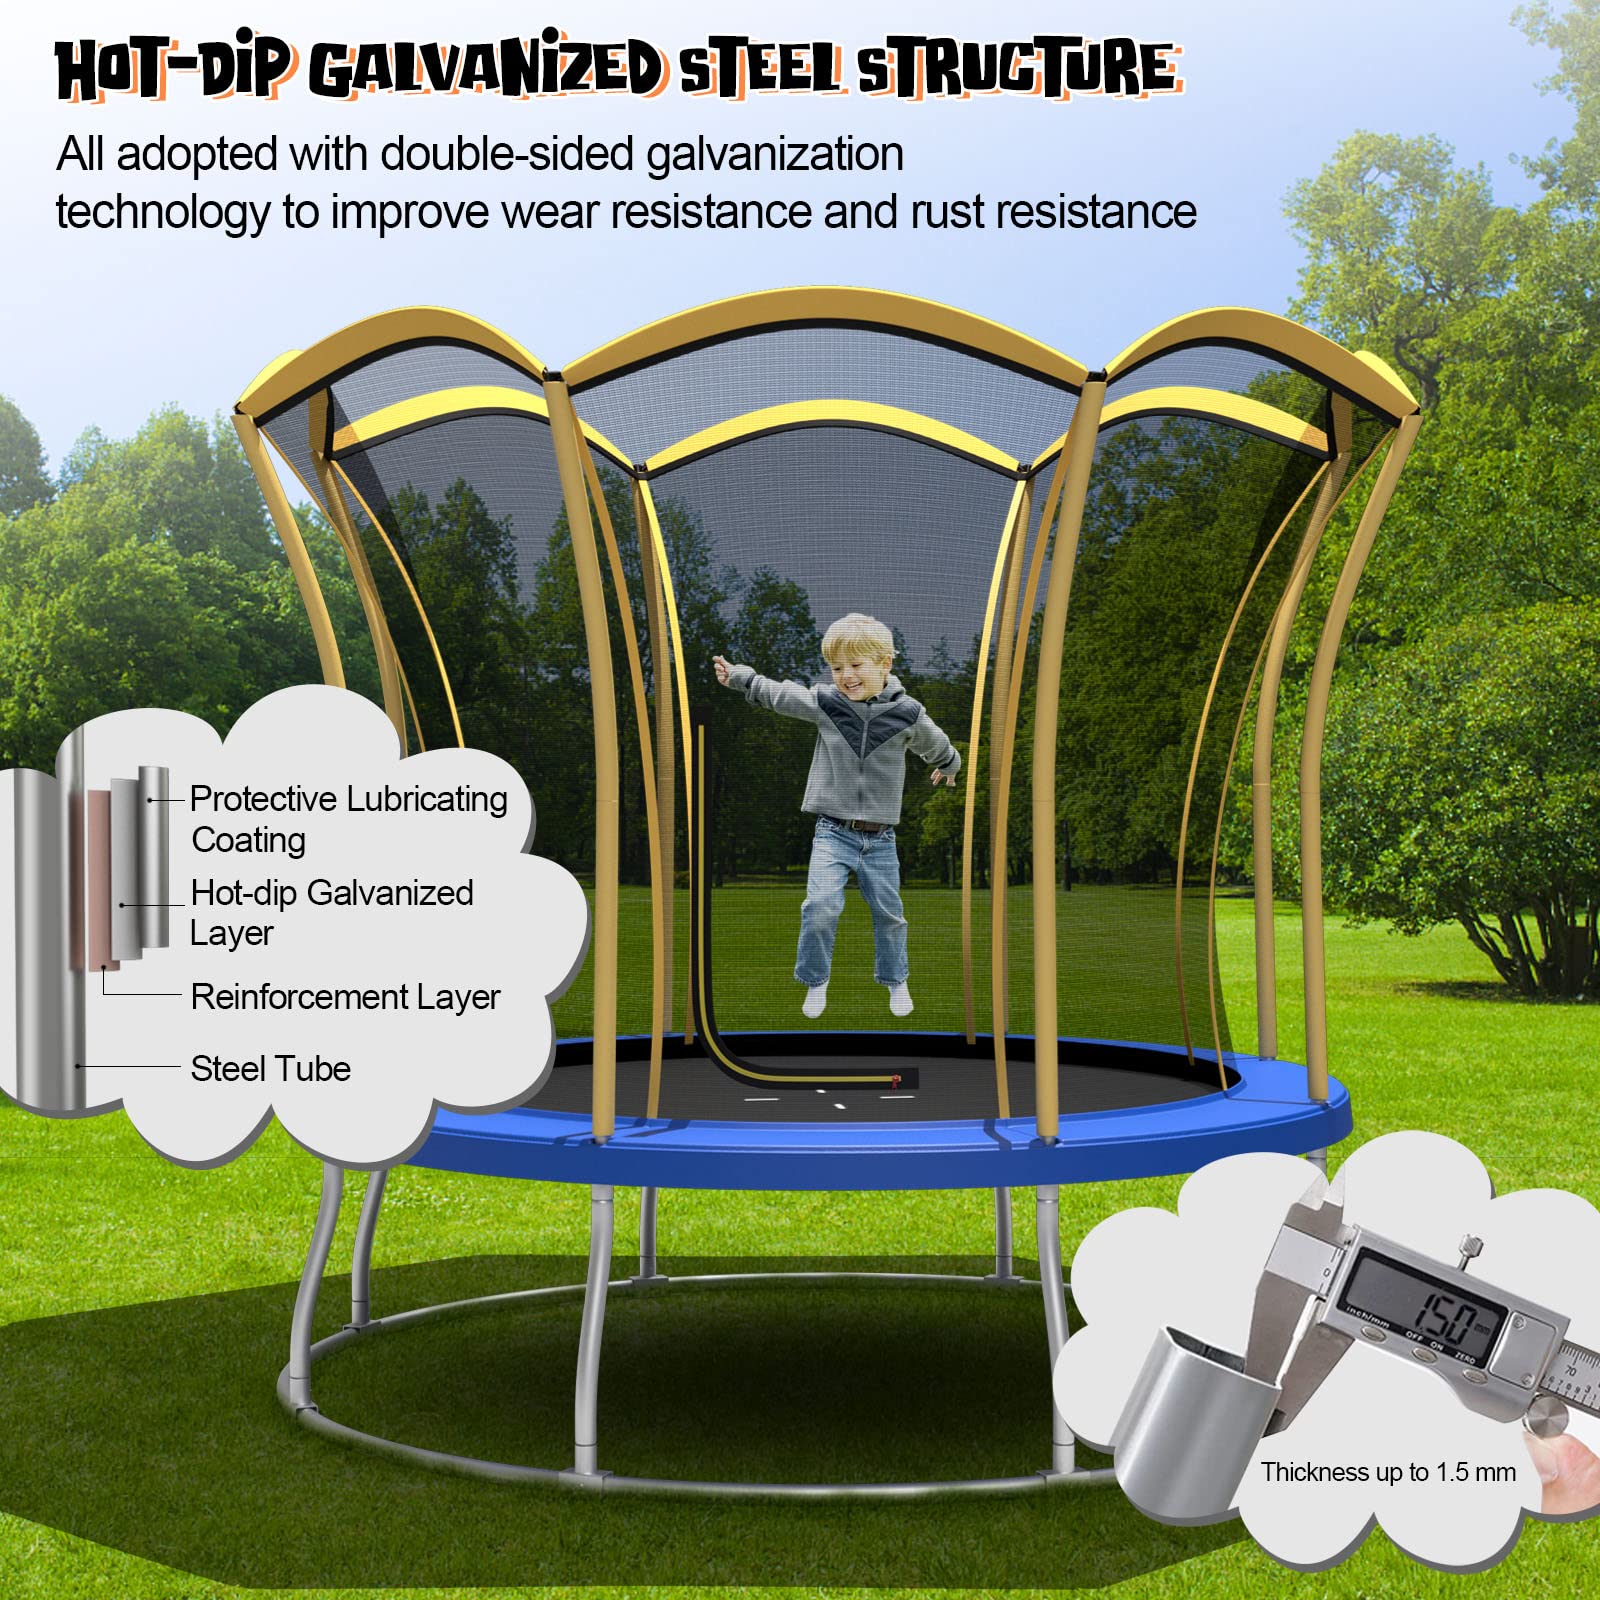 Giantex 8 FT 10 FT Trampoline, ASTM Certified Recreational Trampolines with Net, Galvanized Steel Frame